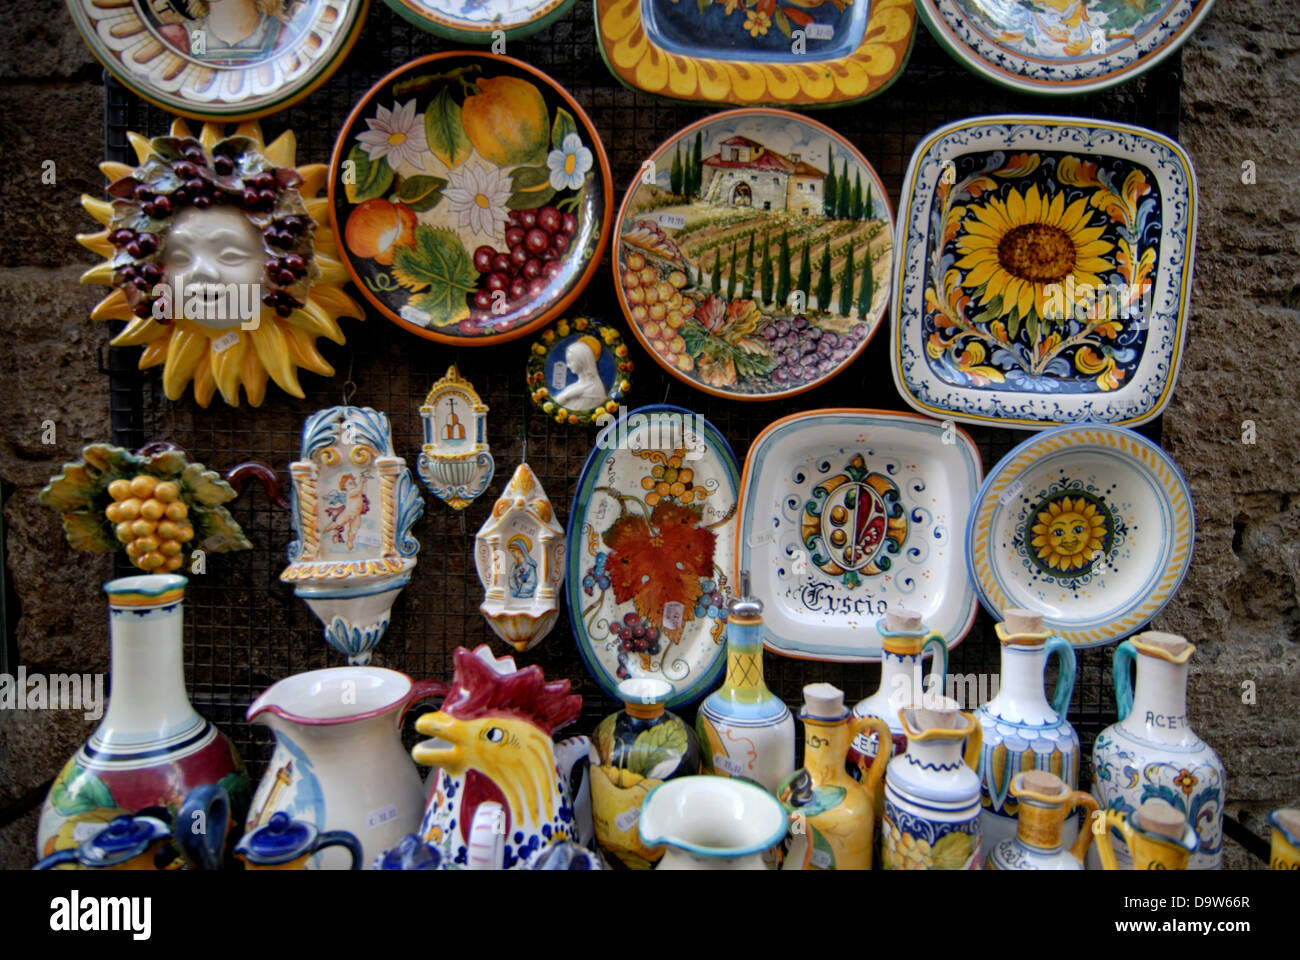 Traditional plates and other products in a Souvenir shop, San Gimignano, Siena, Tuscany, Italy Stock Photo